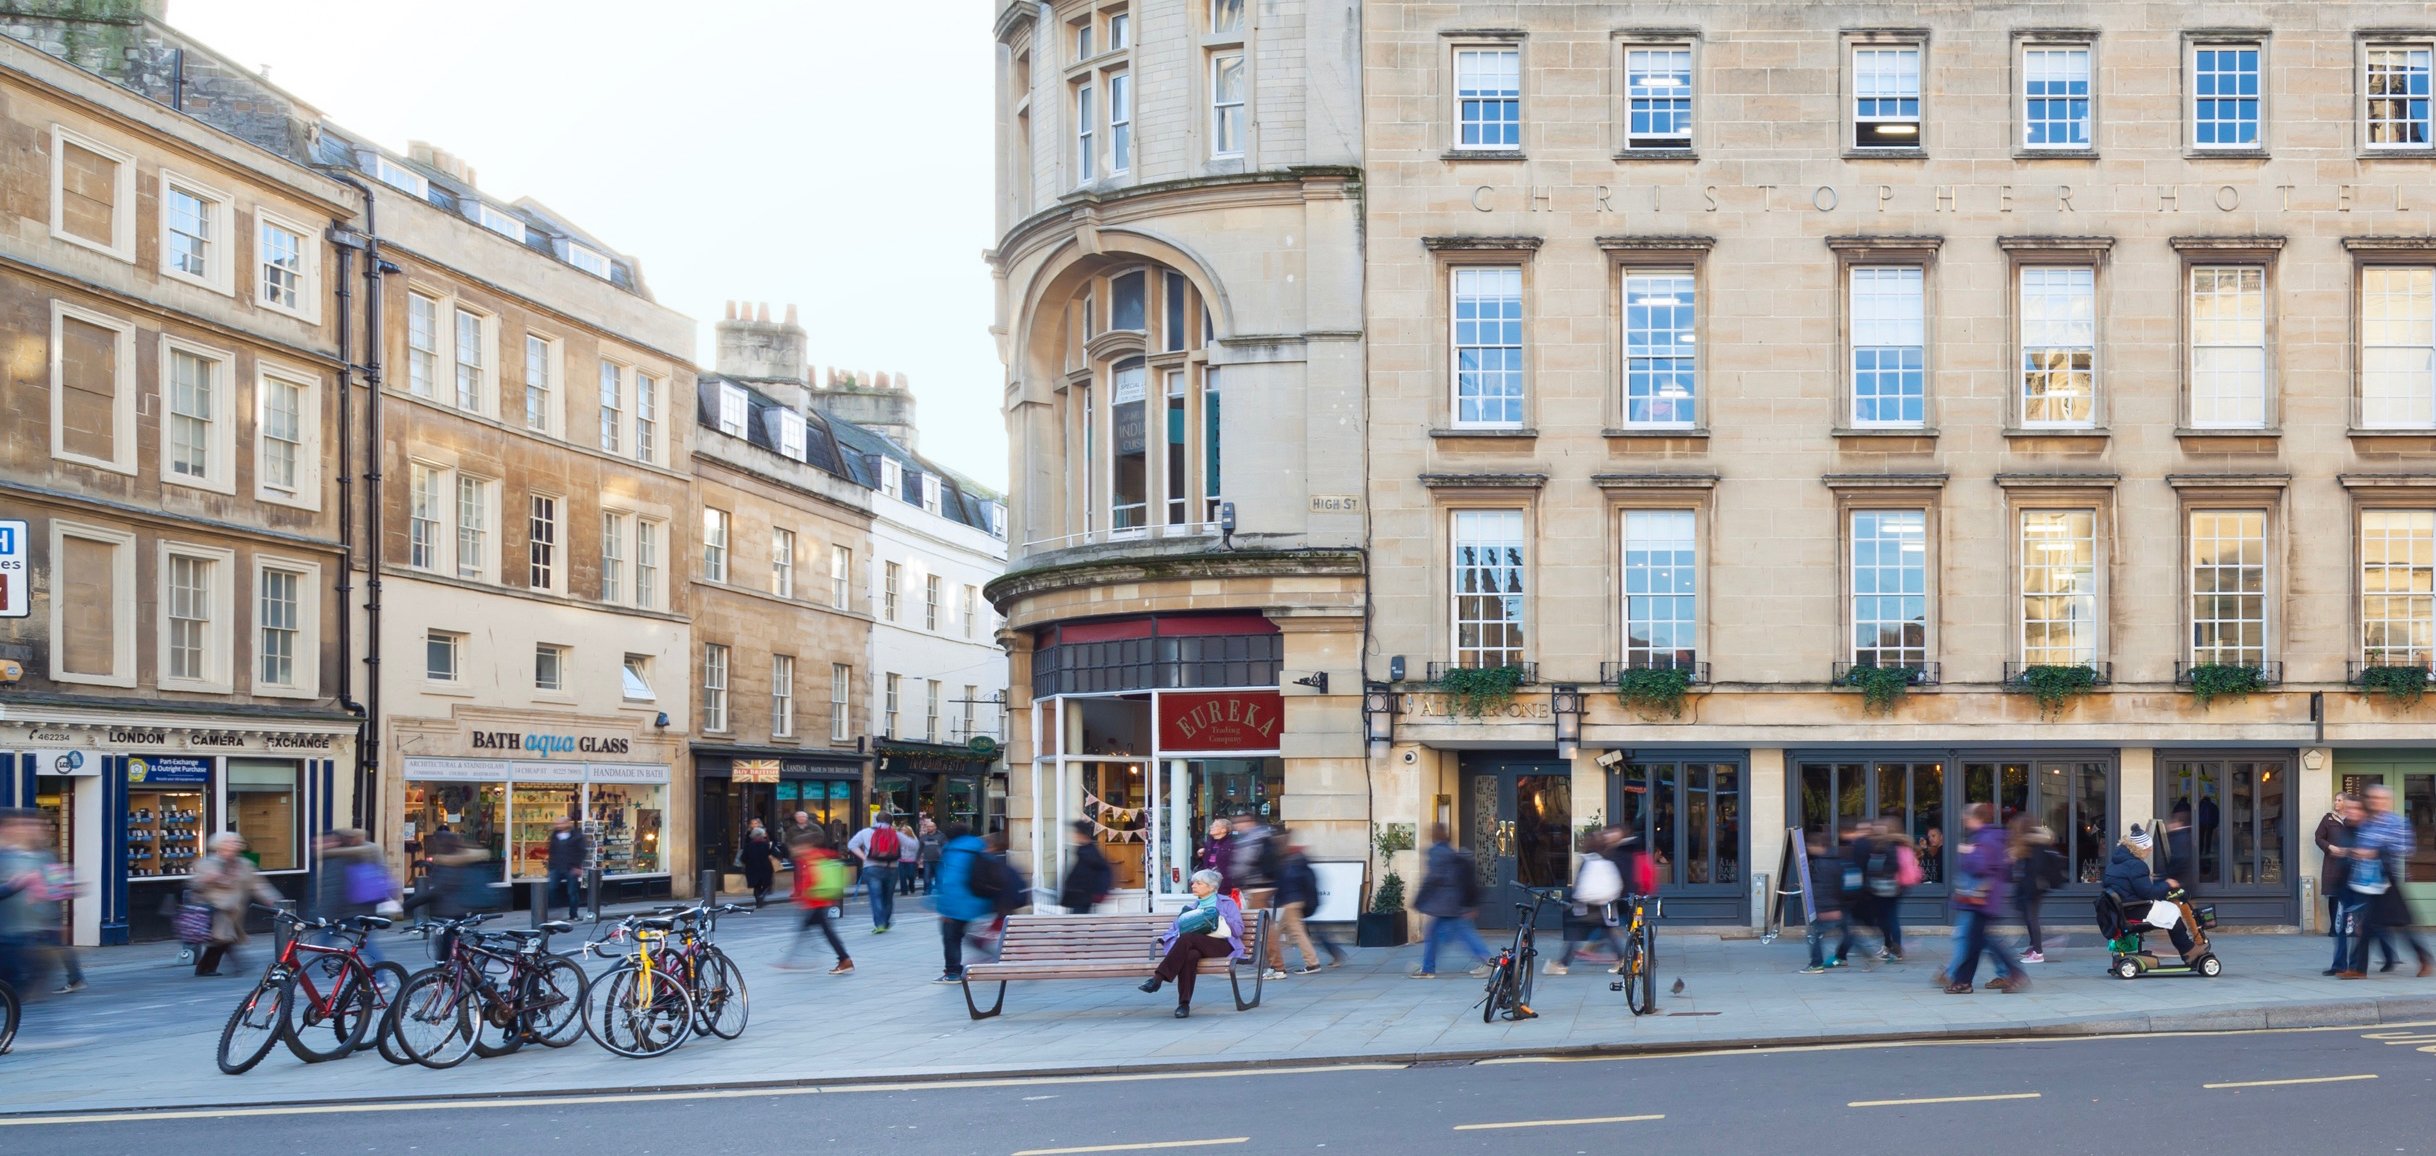 Busy pavement and pedestrianised area in Bath.